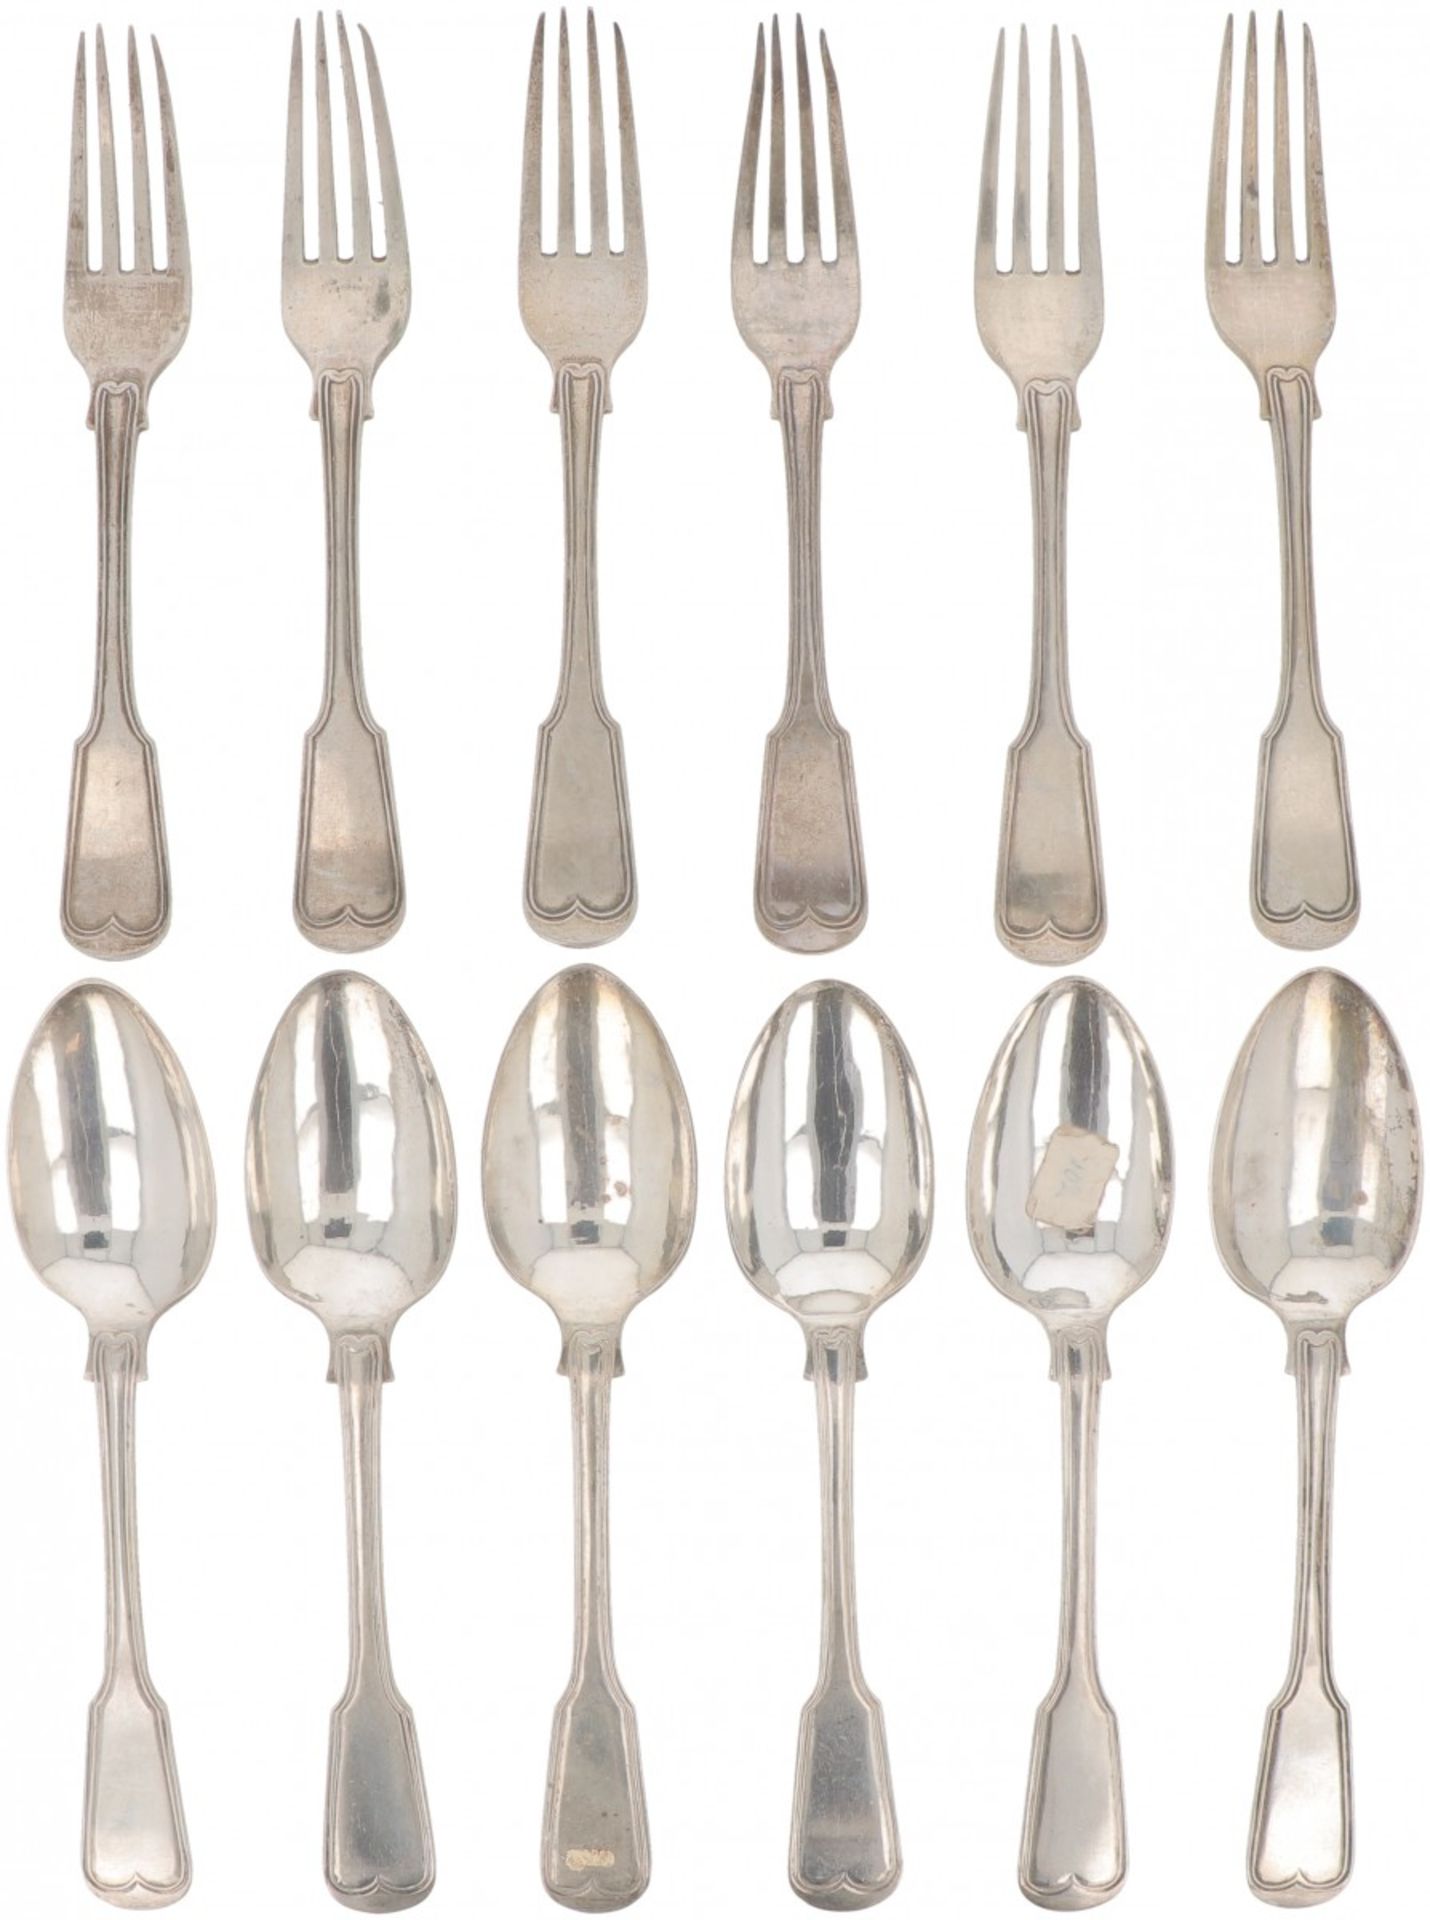 (12) piece set of spoons & forks silver.